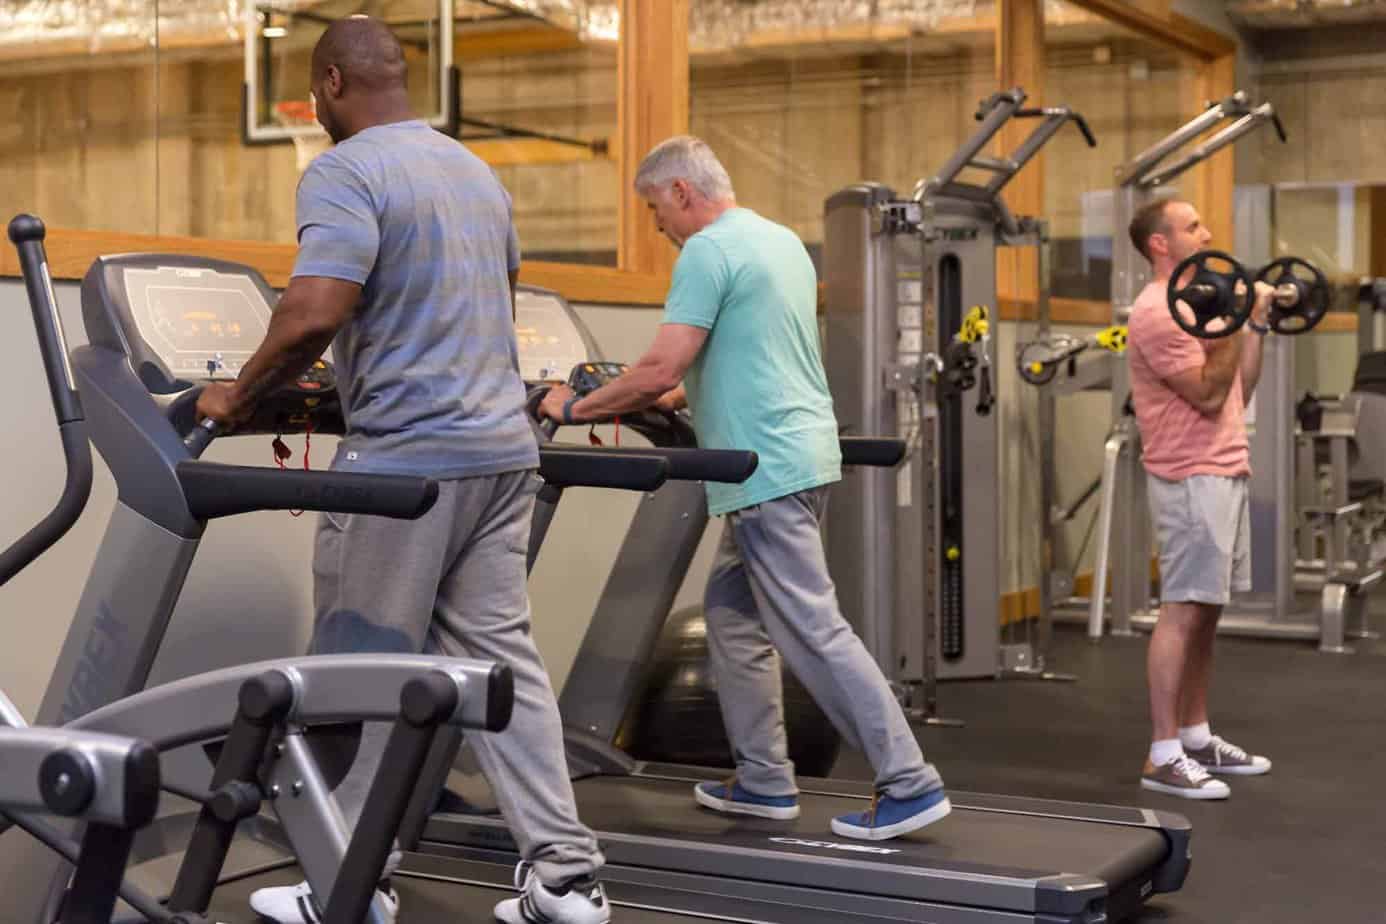 Two men on treadmills exercising to battle withdrawal symptoms at Mountainside rehab's gym